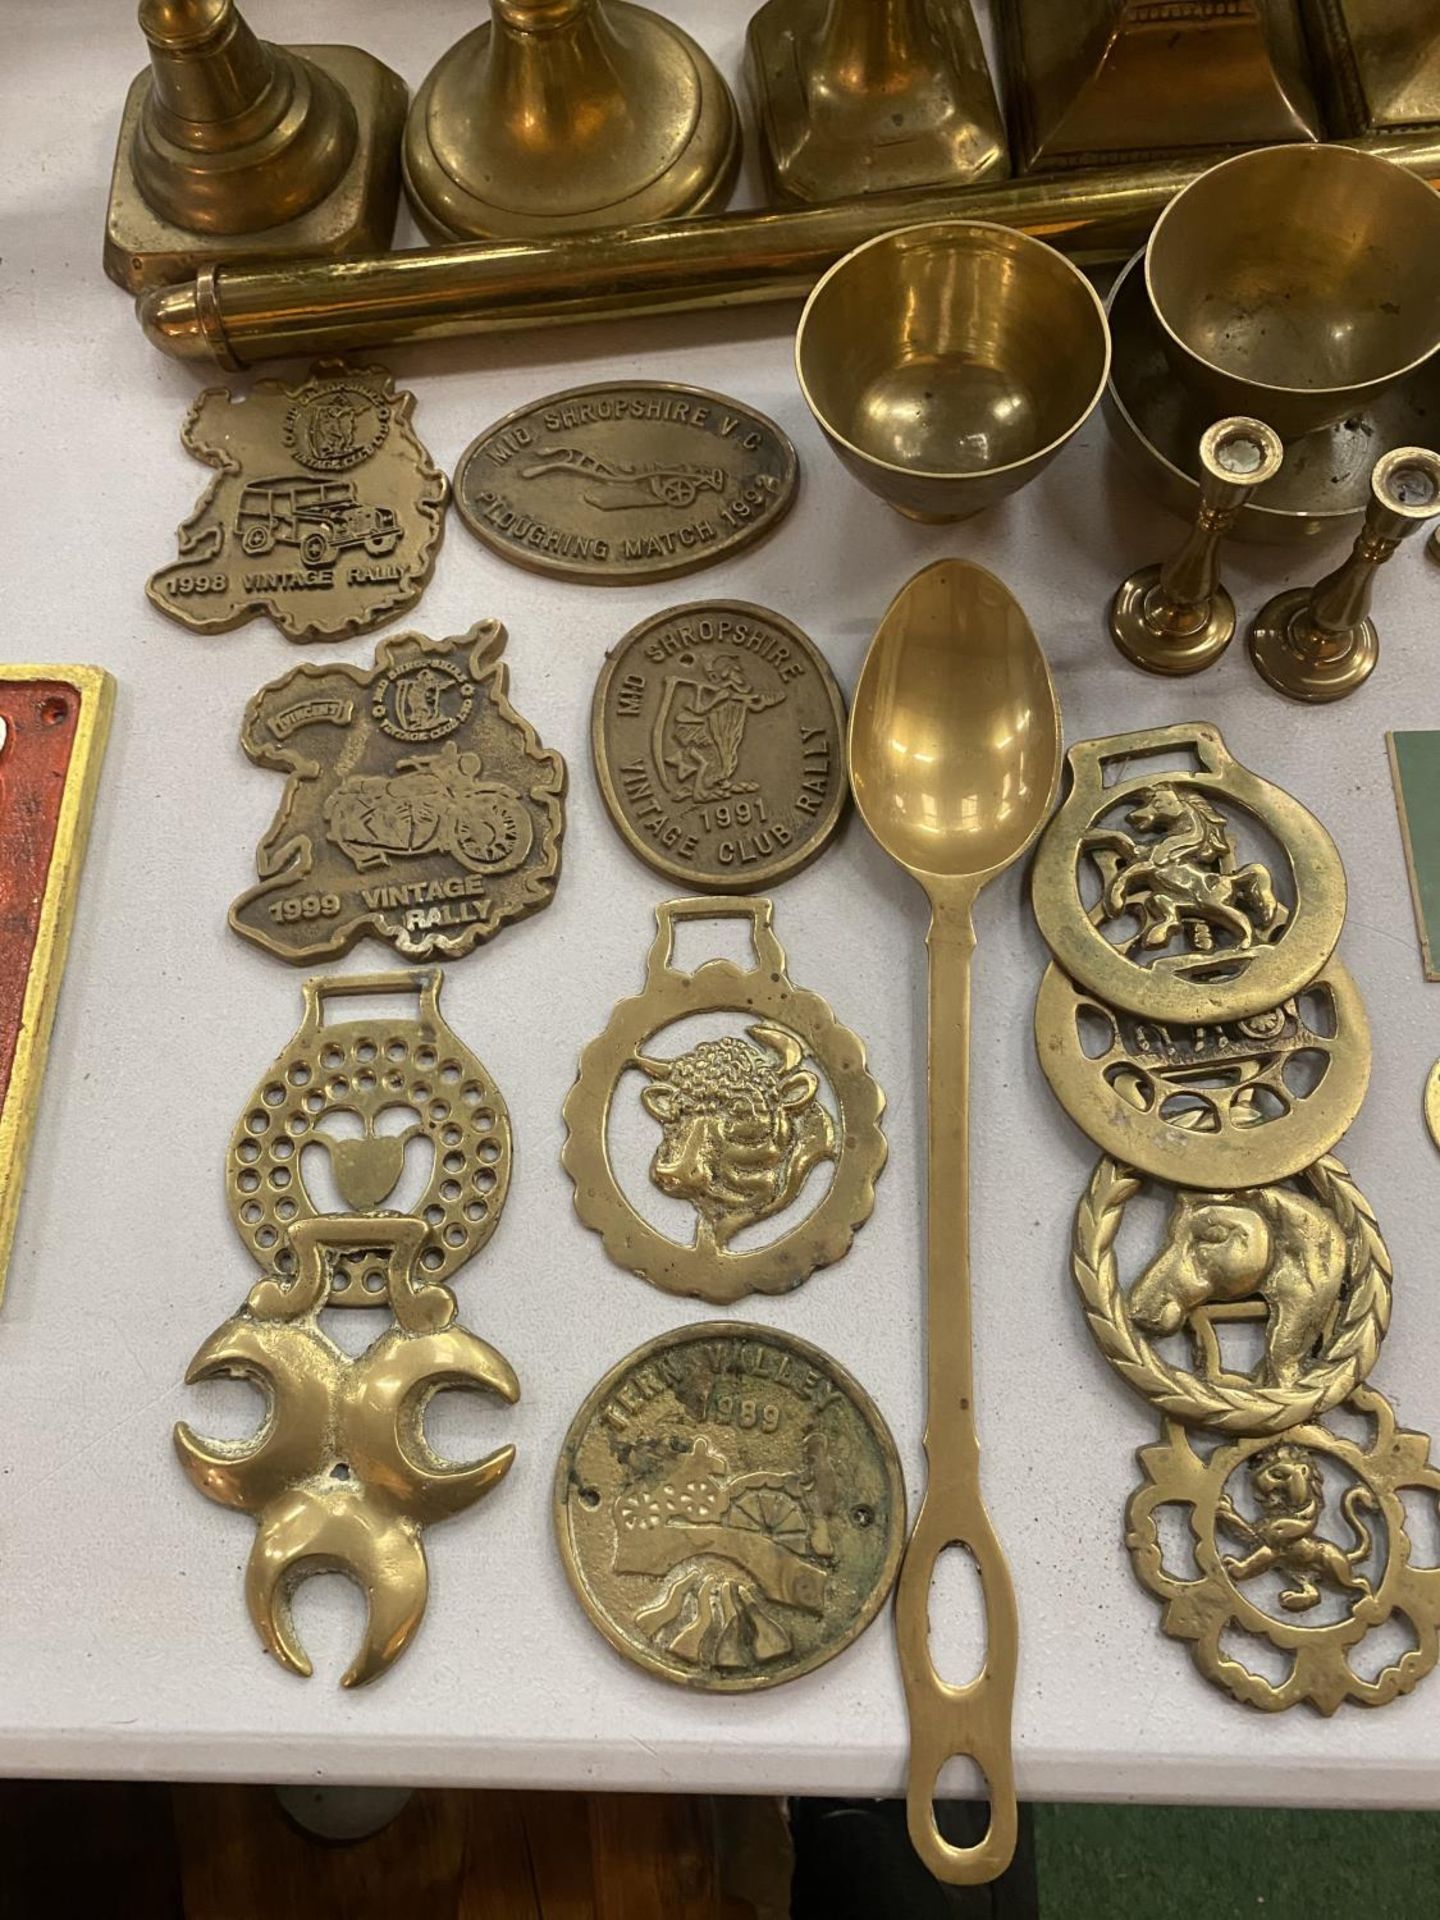 A COLLECTION OF BRASS WARE TO INCLUDE COAL SCUTTLE, CANDLESTICKS, HORSE BRASSES, RALLY PLAQUES ETC - Image 3 of 4